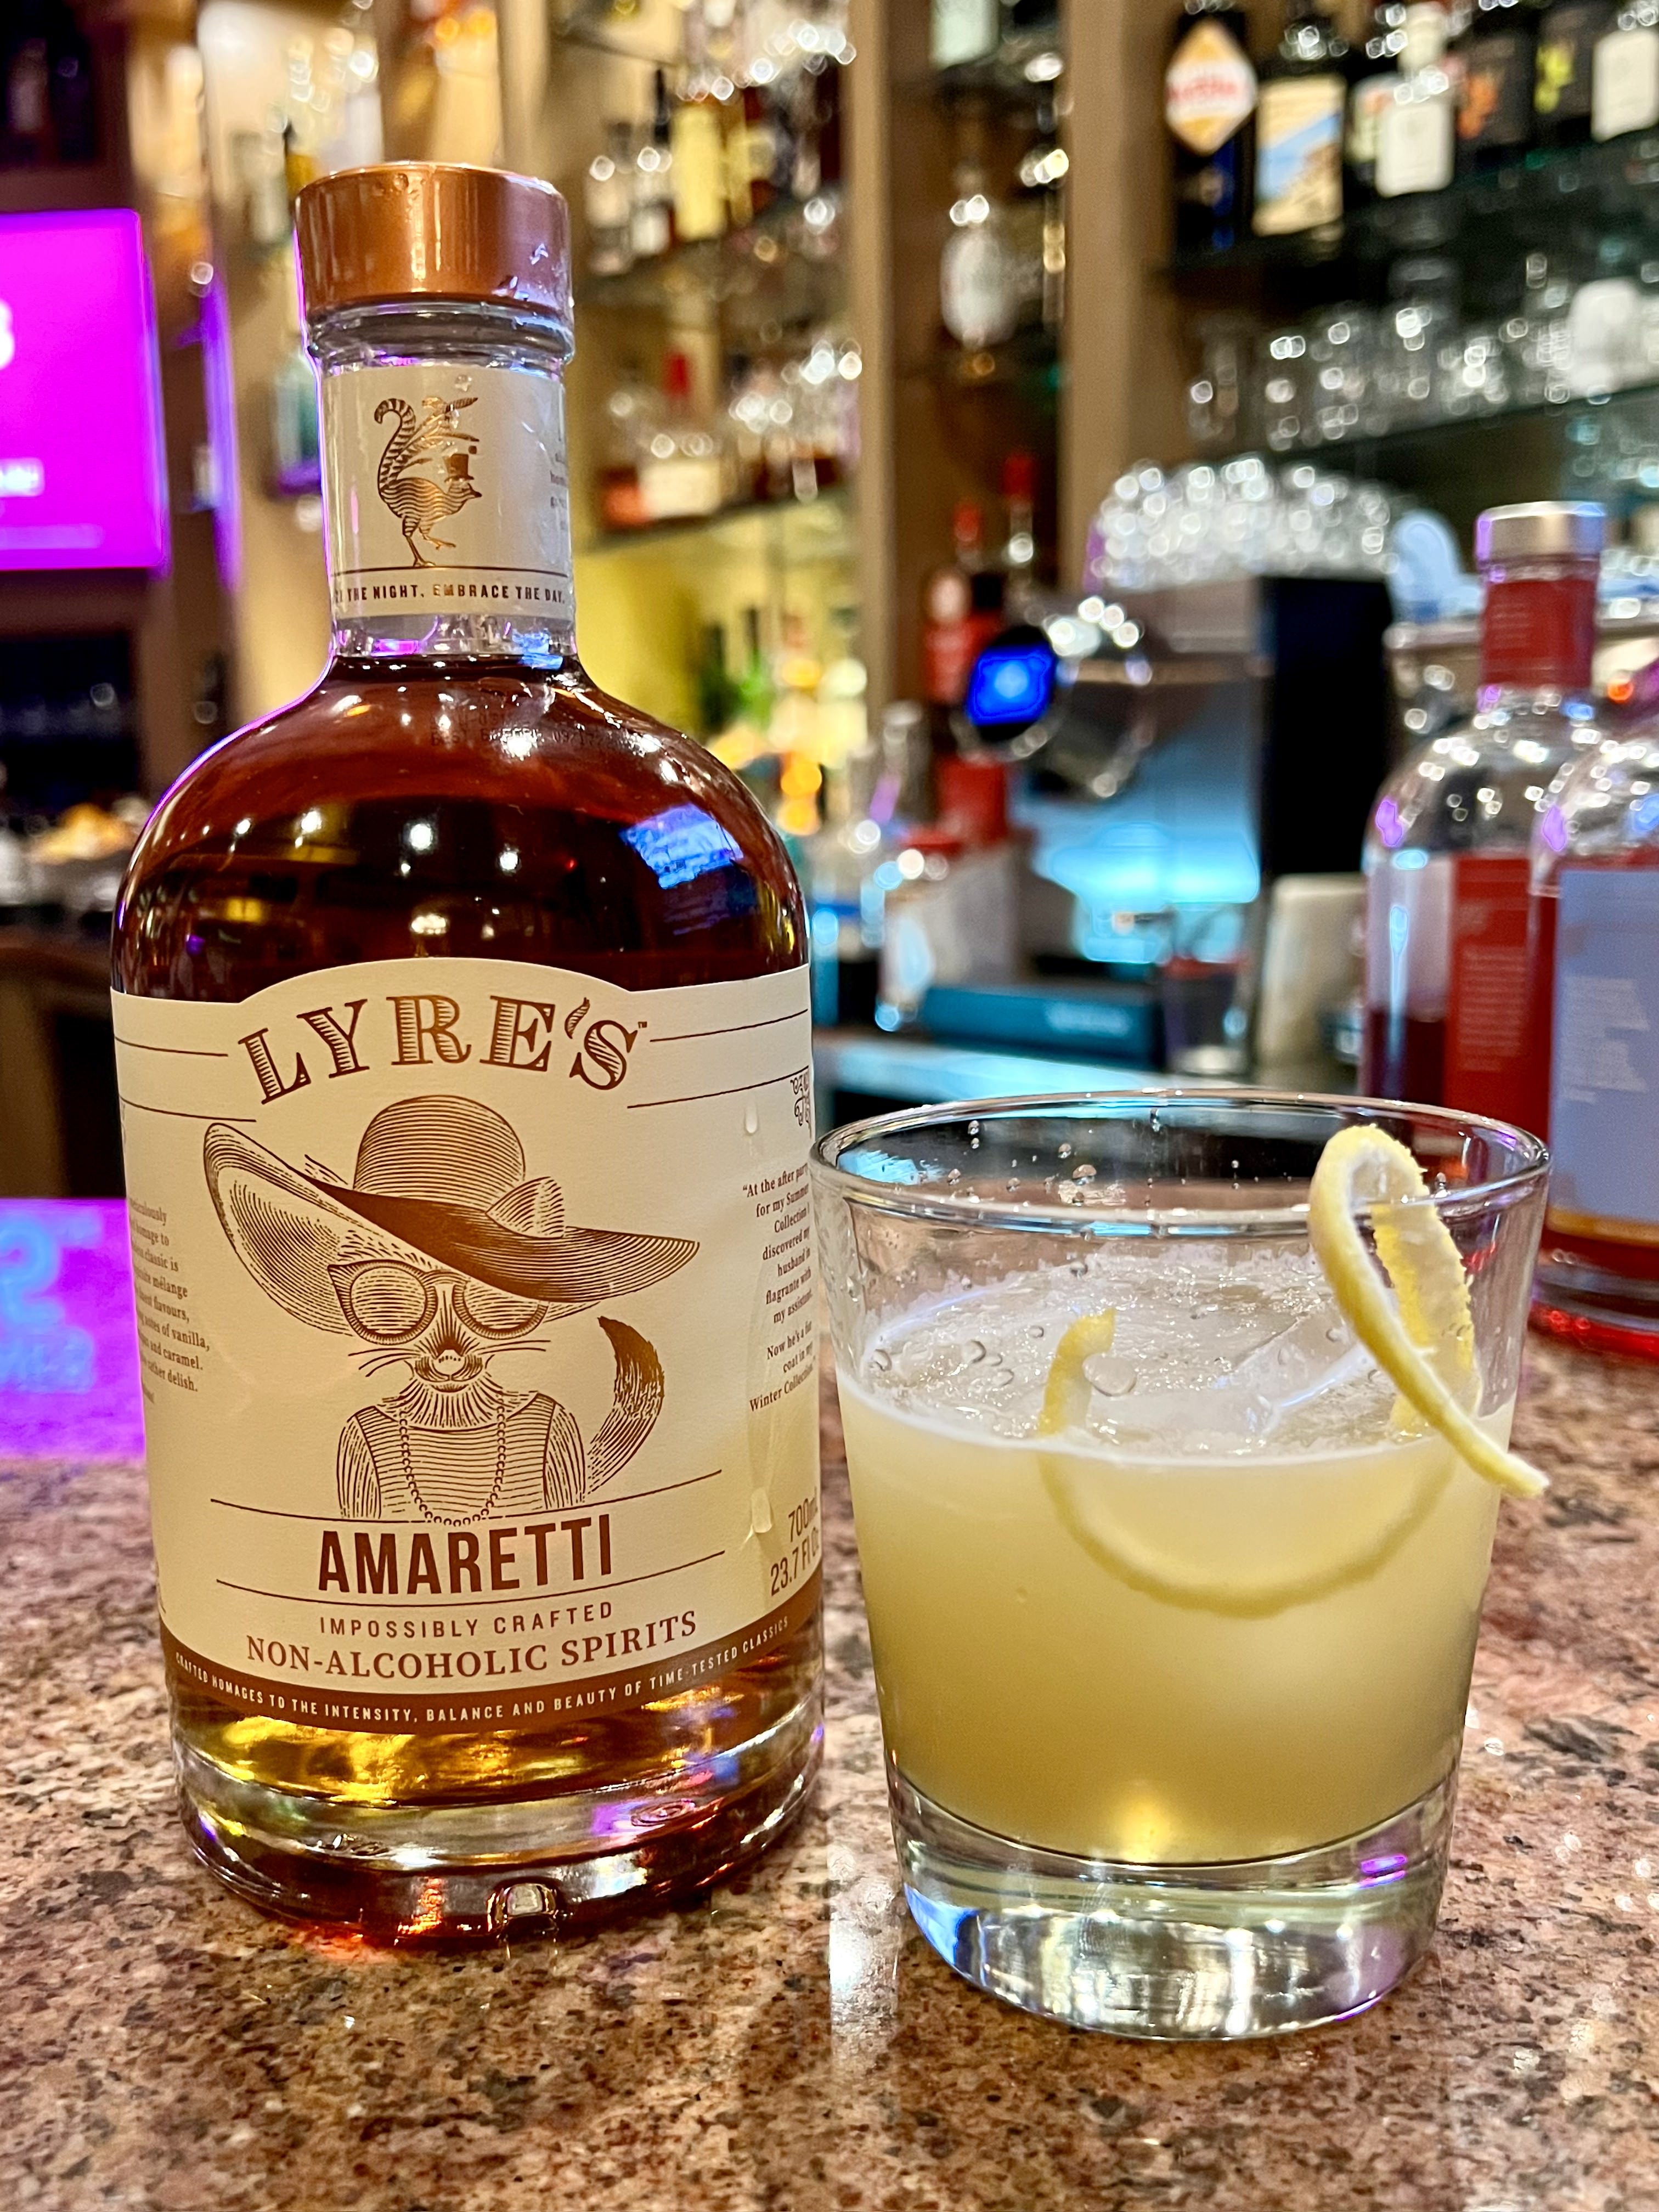 Geateano's Amoretti Sour mocktail - Lyre's Amaretto non-alcoholic spirits bottle with cat wearing hat and glasses logo beside glass with lemonade colored drink topped with a lemon twist